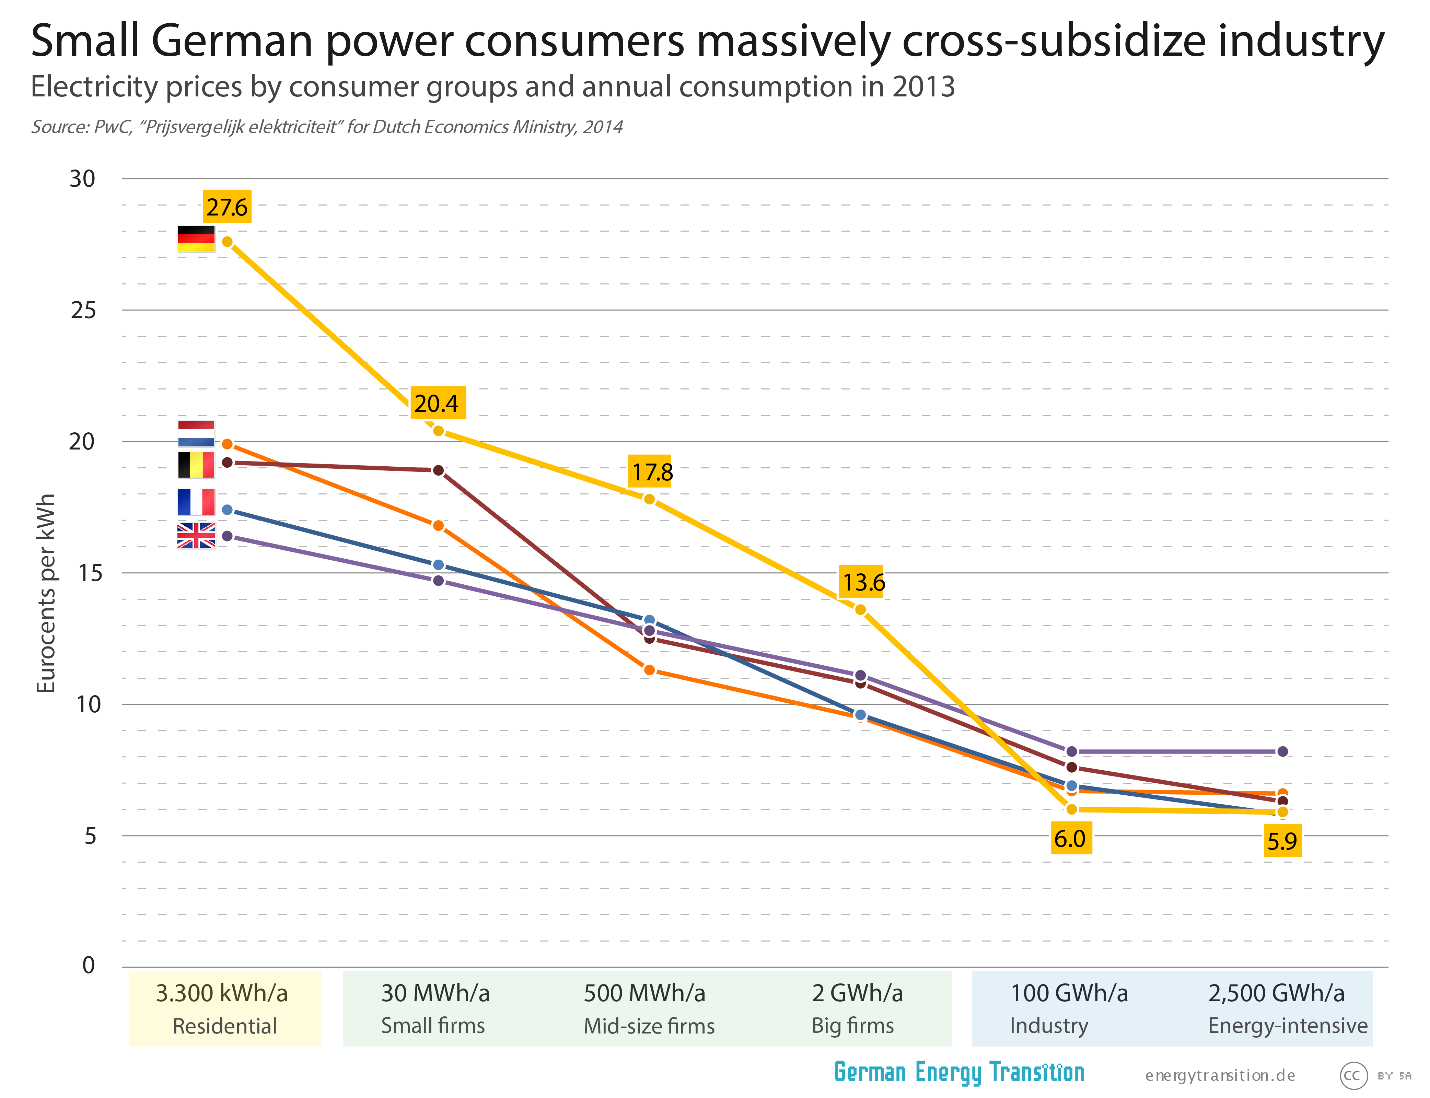 Small German consumers massively cross-subsidize industry